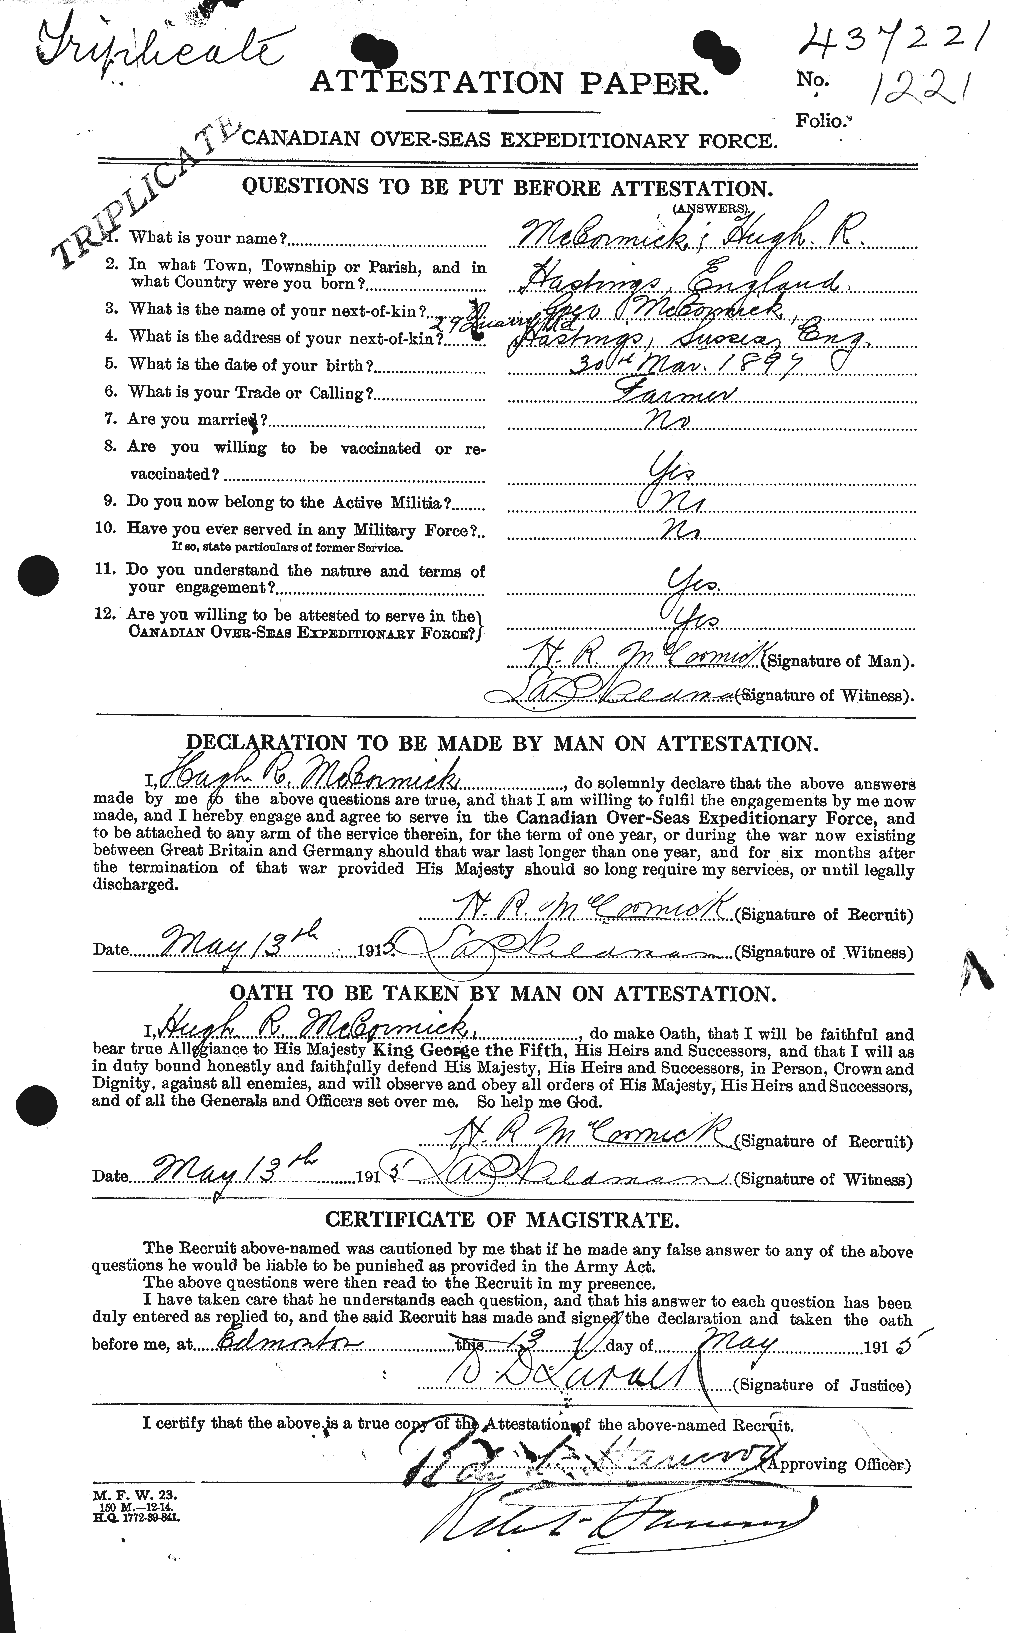 Personnel Records of the First World War - CEF 133733a